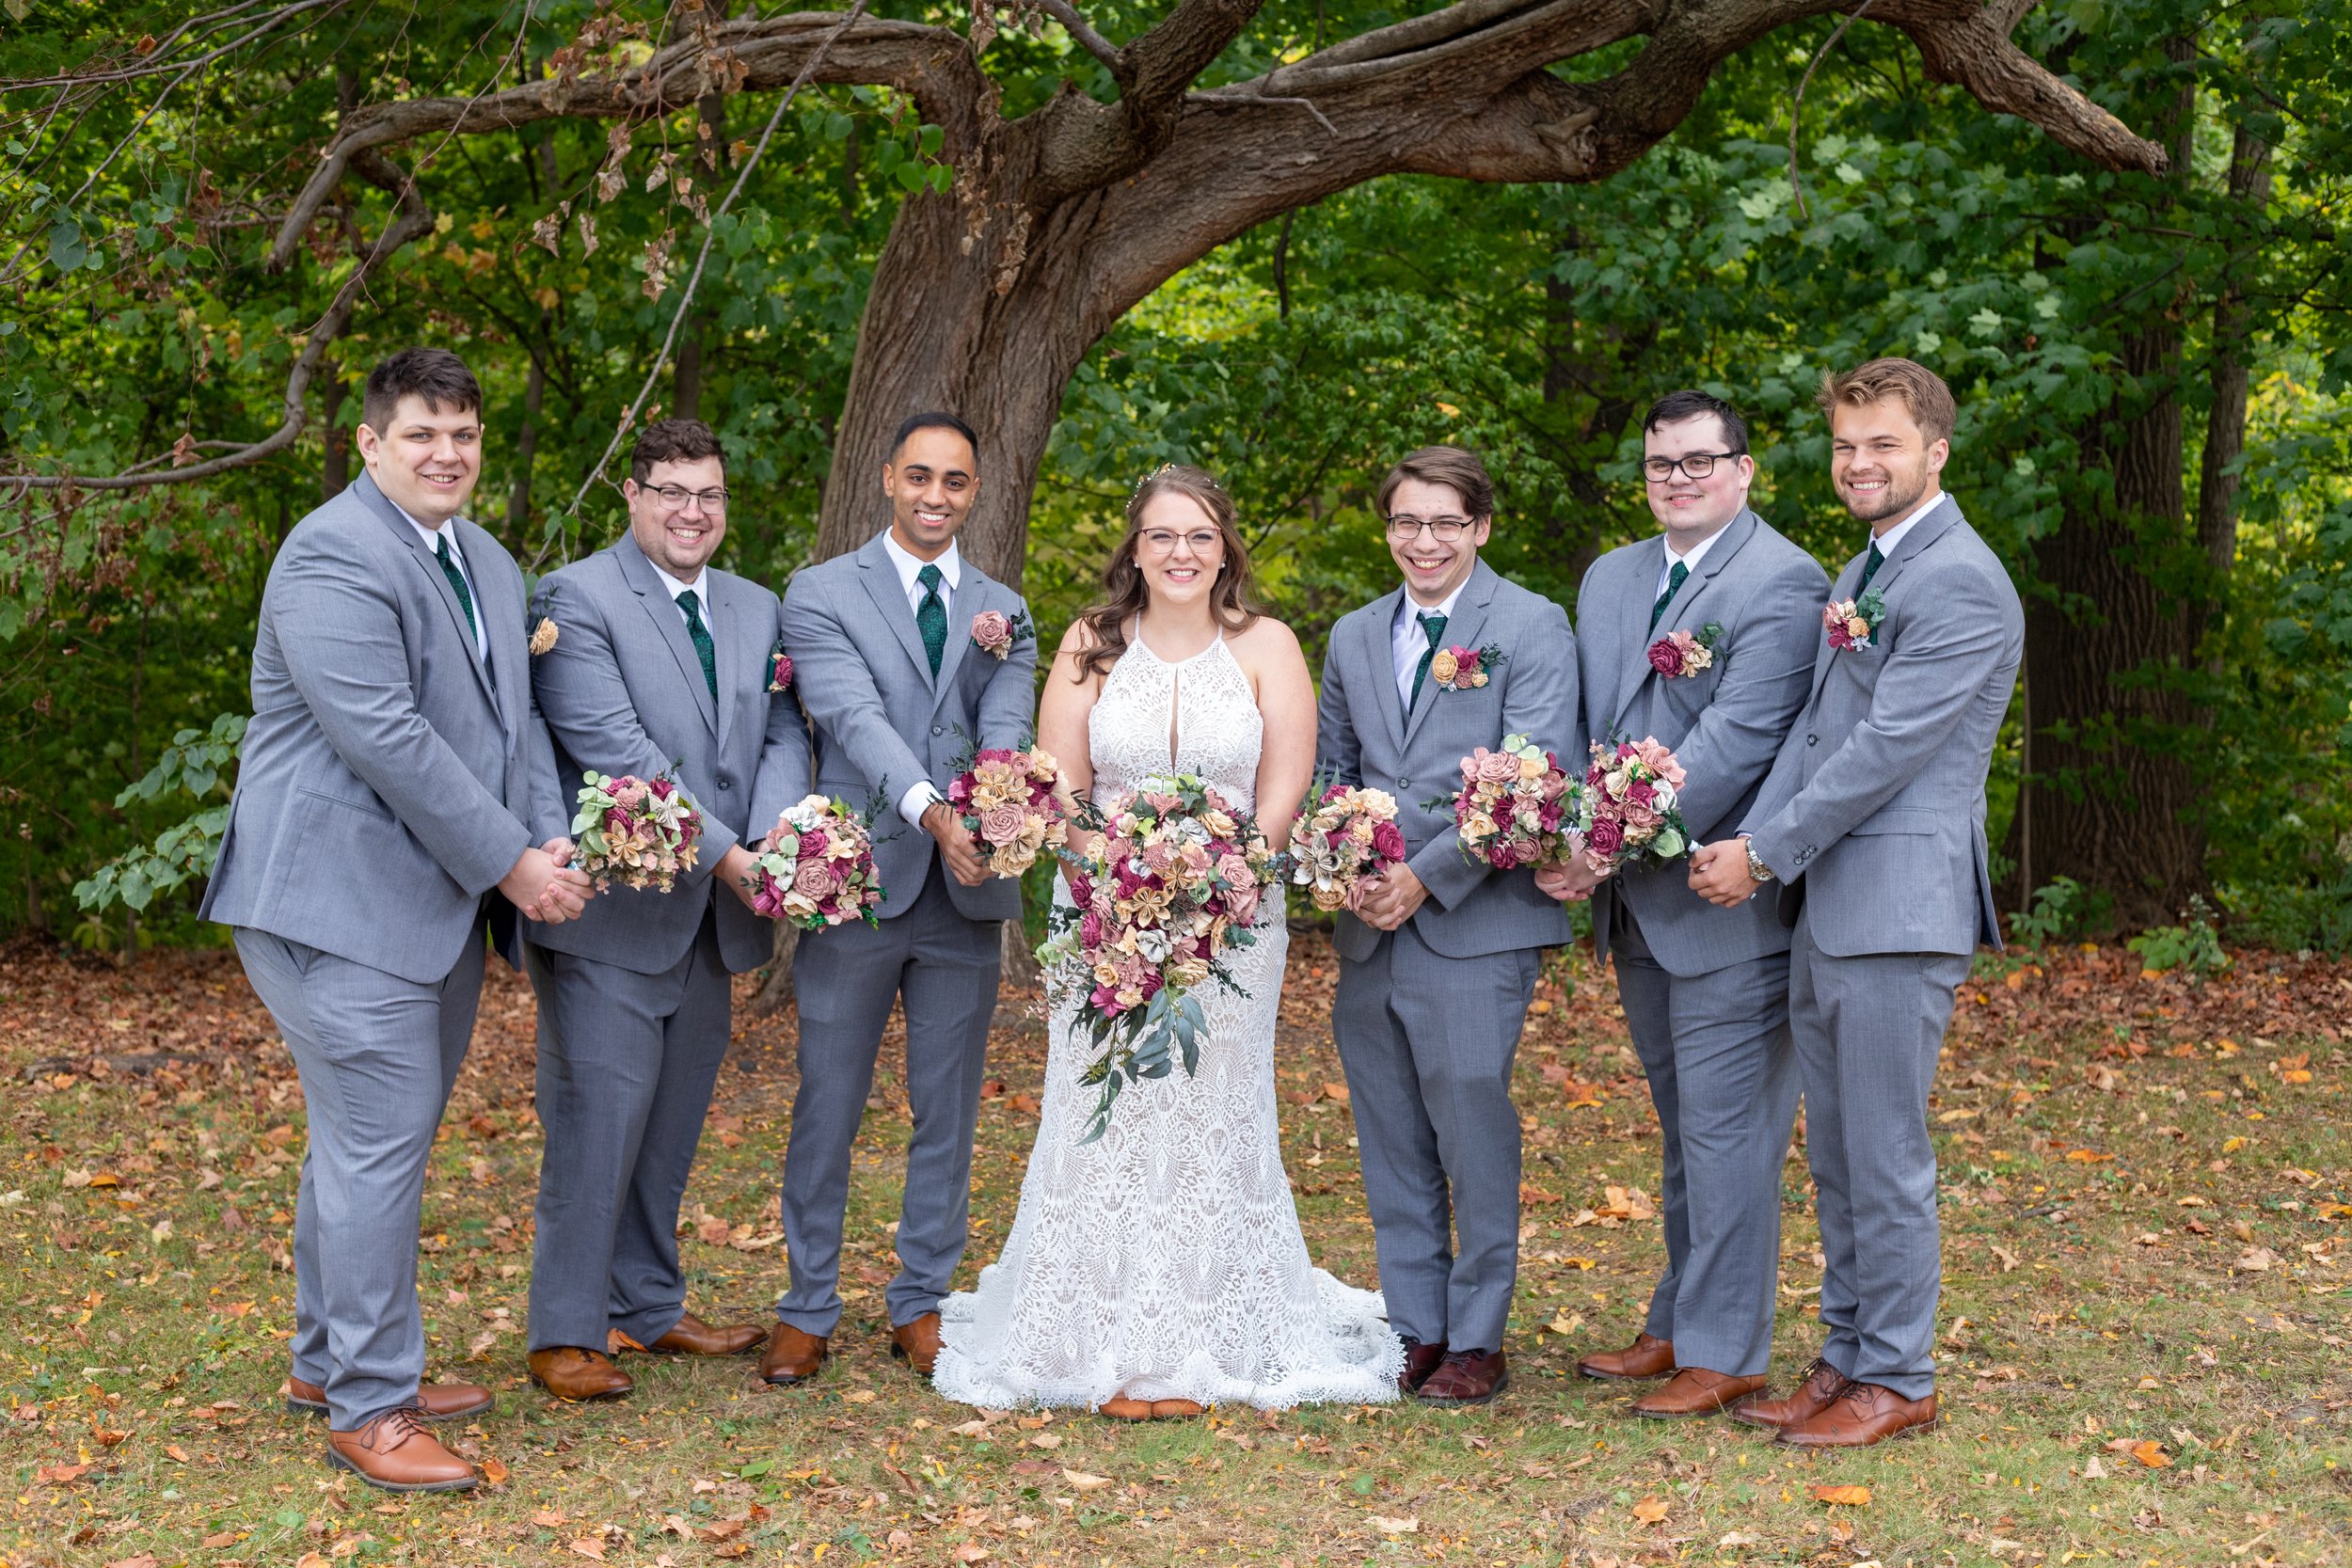 All Family and Bridal Party Portraits - Mary Anne and Mahmoud-26.jpg